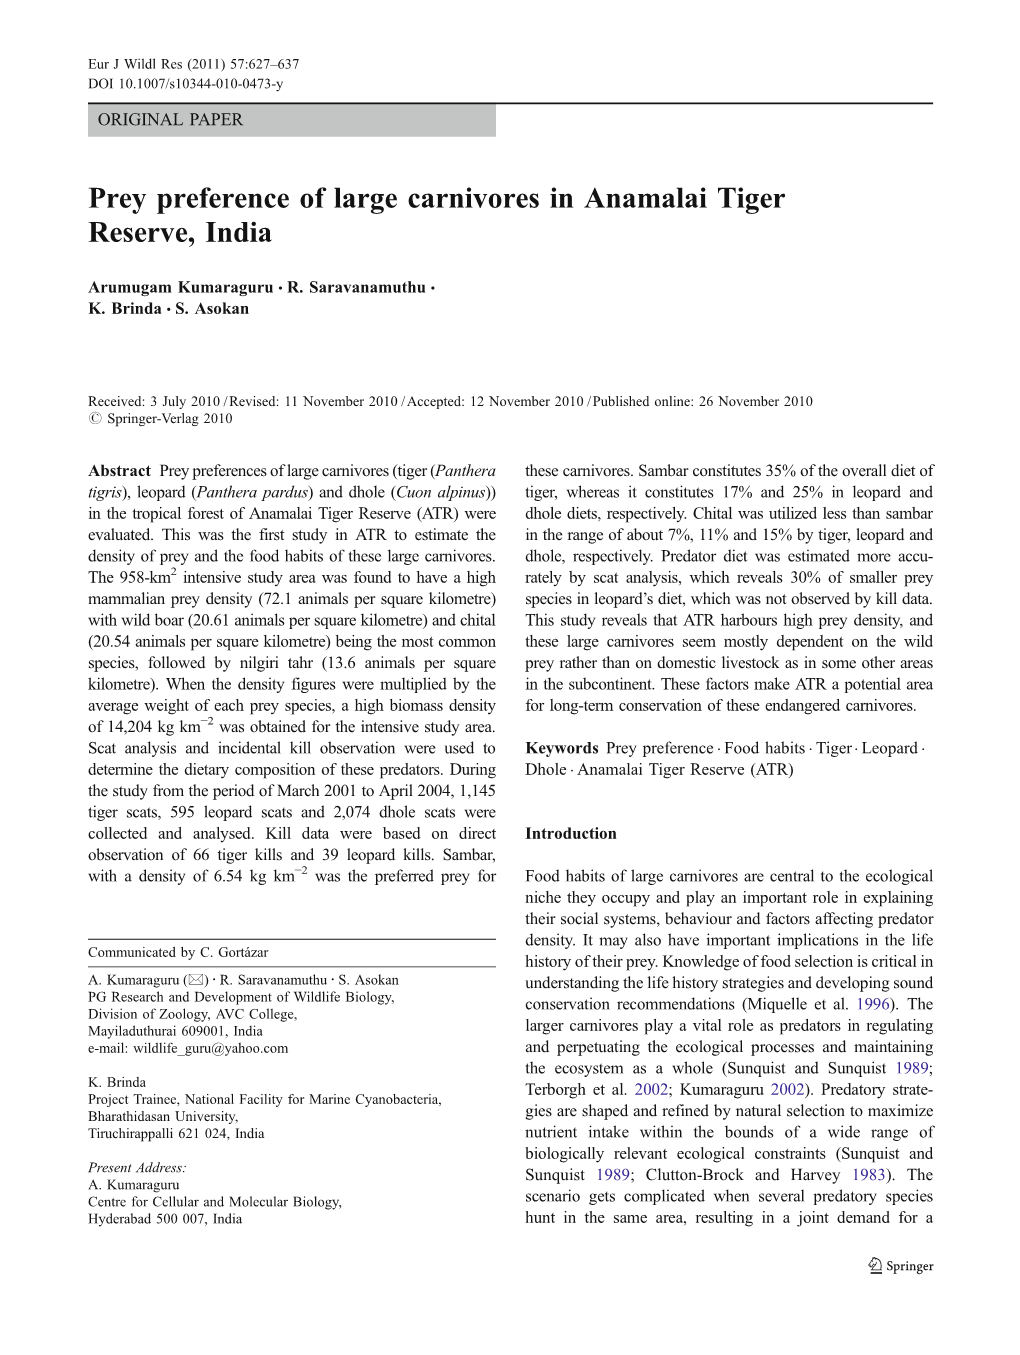 Prey Preference of Large Carnivores in Anamalai Tiger Reserve, India